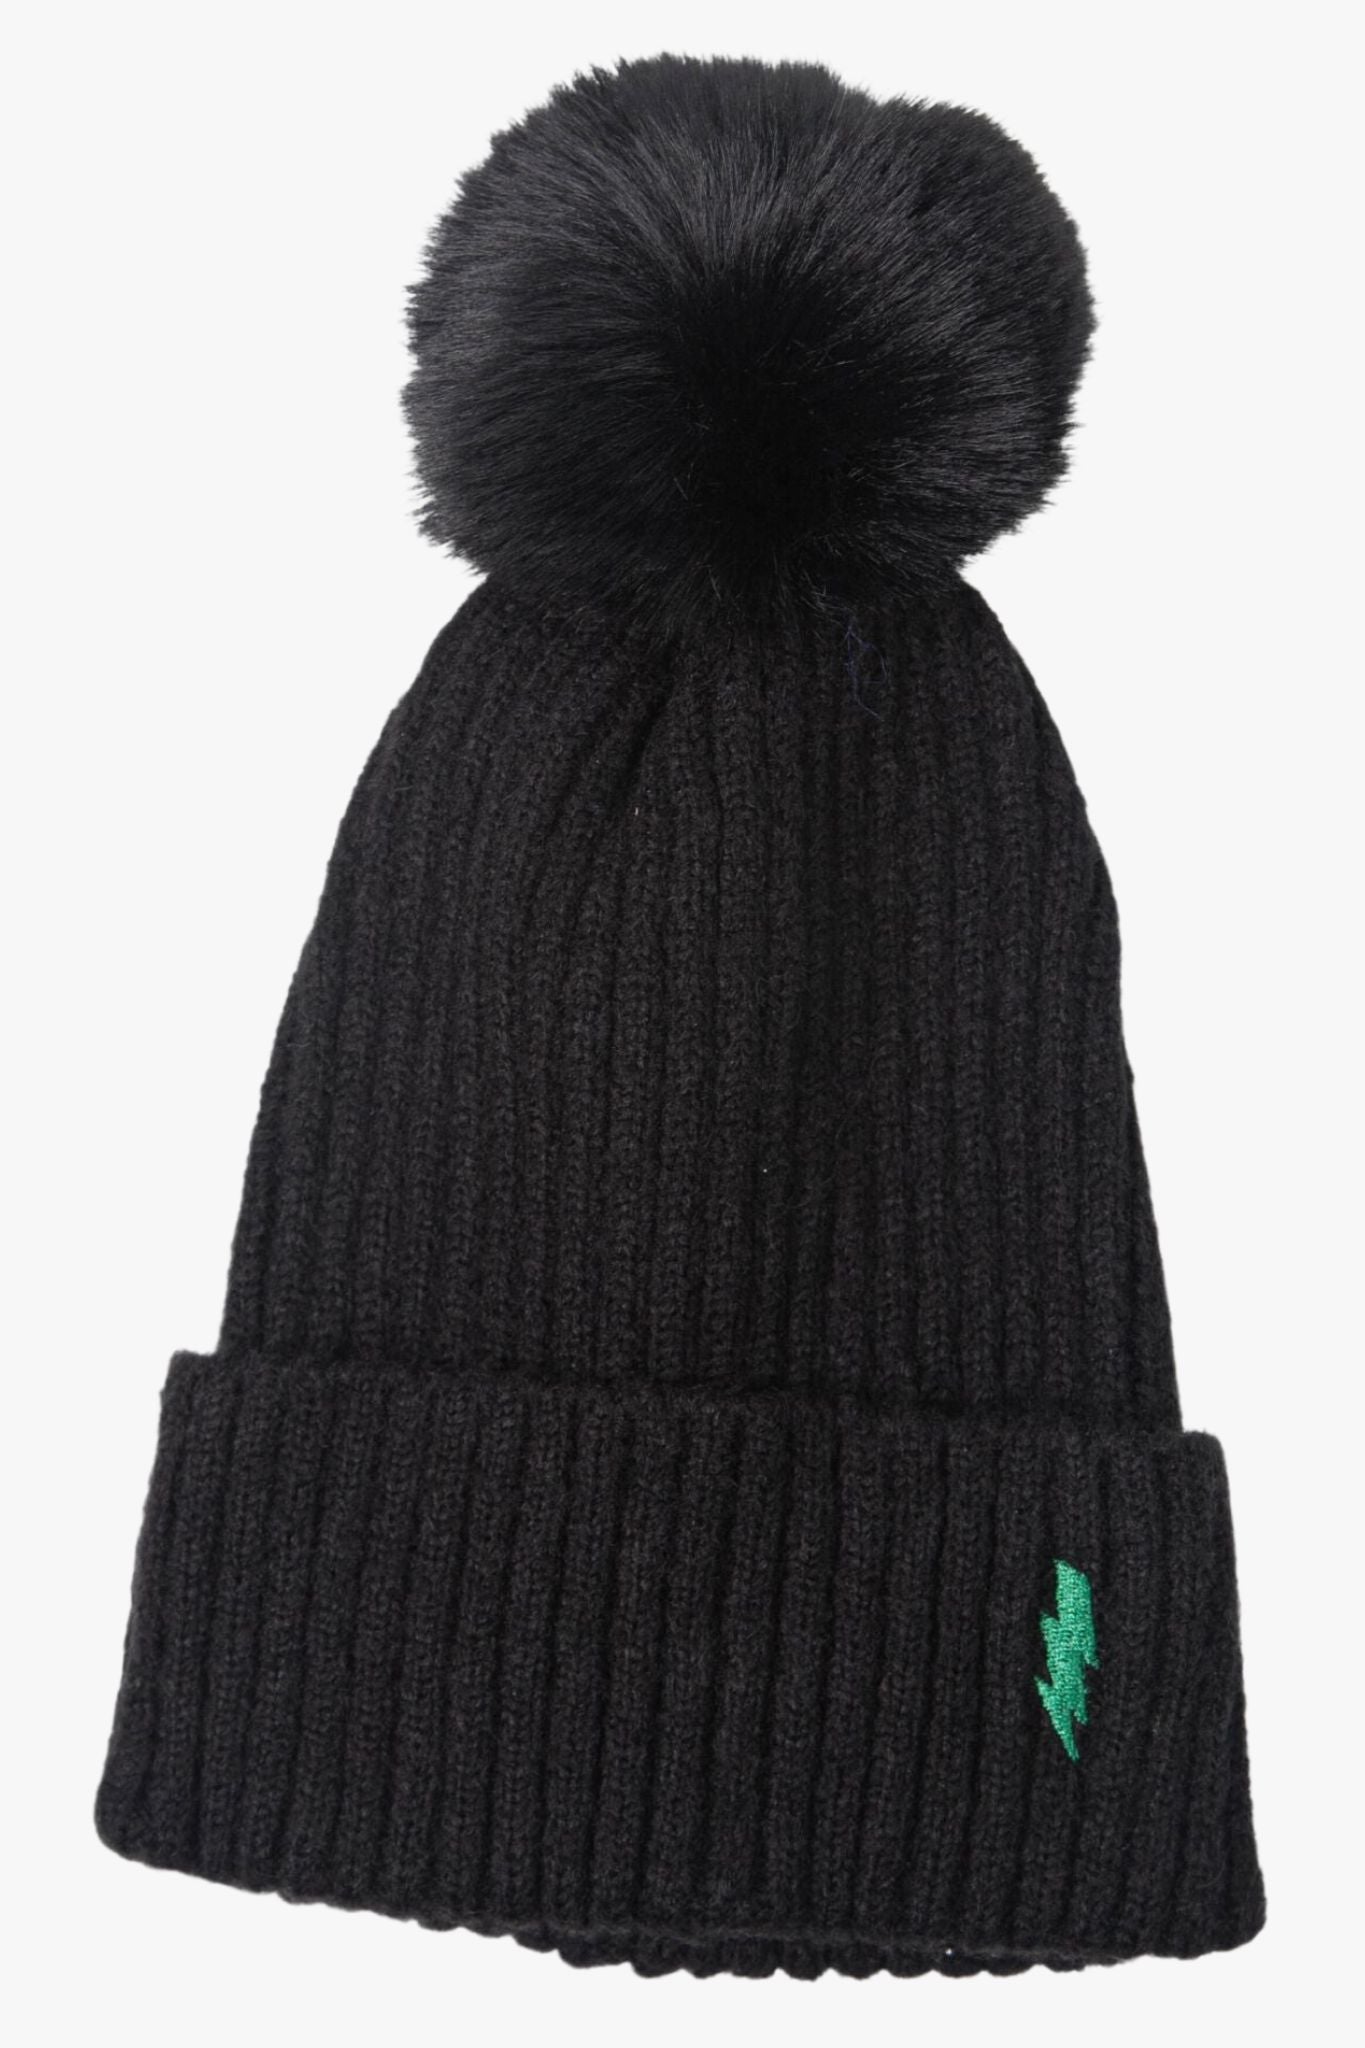 black knitted beanie hat with a pom pom and a green embroidered lightning bolt